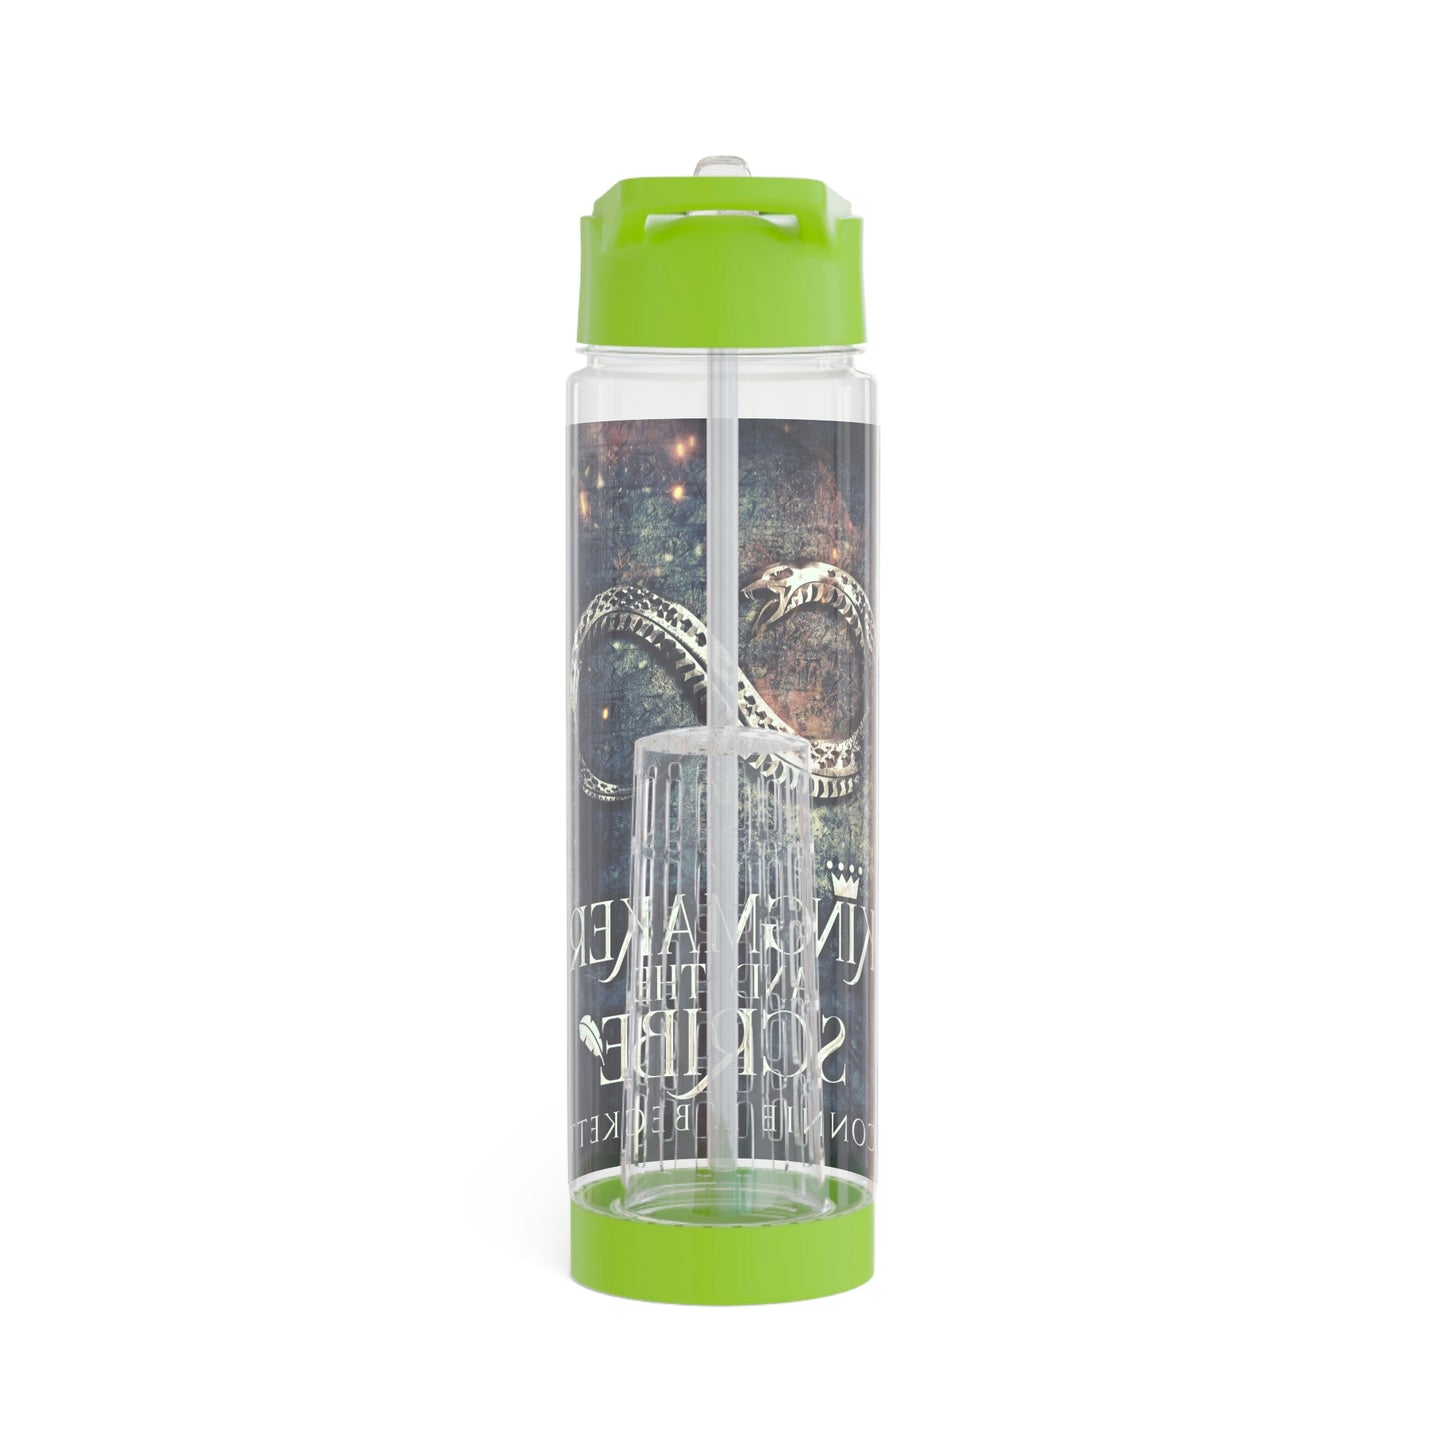 Kingmaker And The Scribe - Infuser Water Bottle